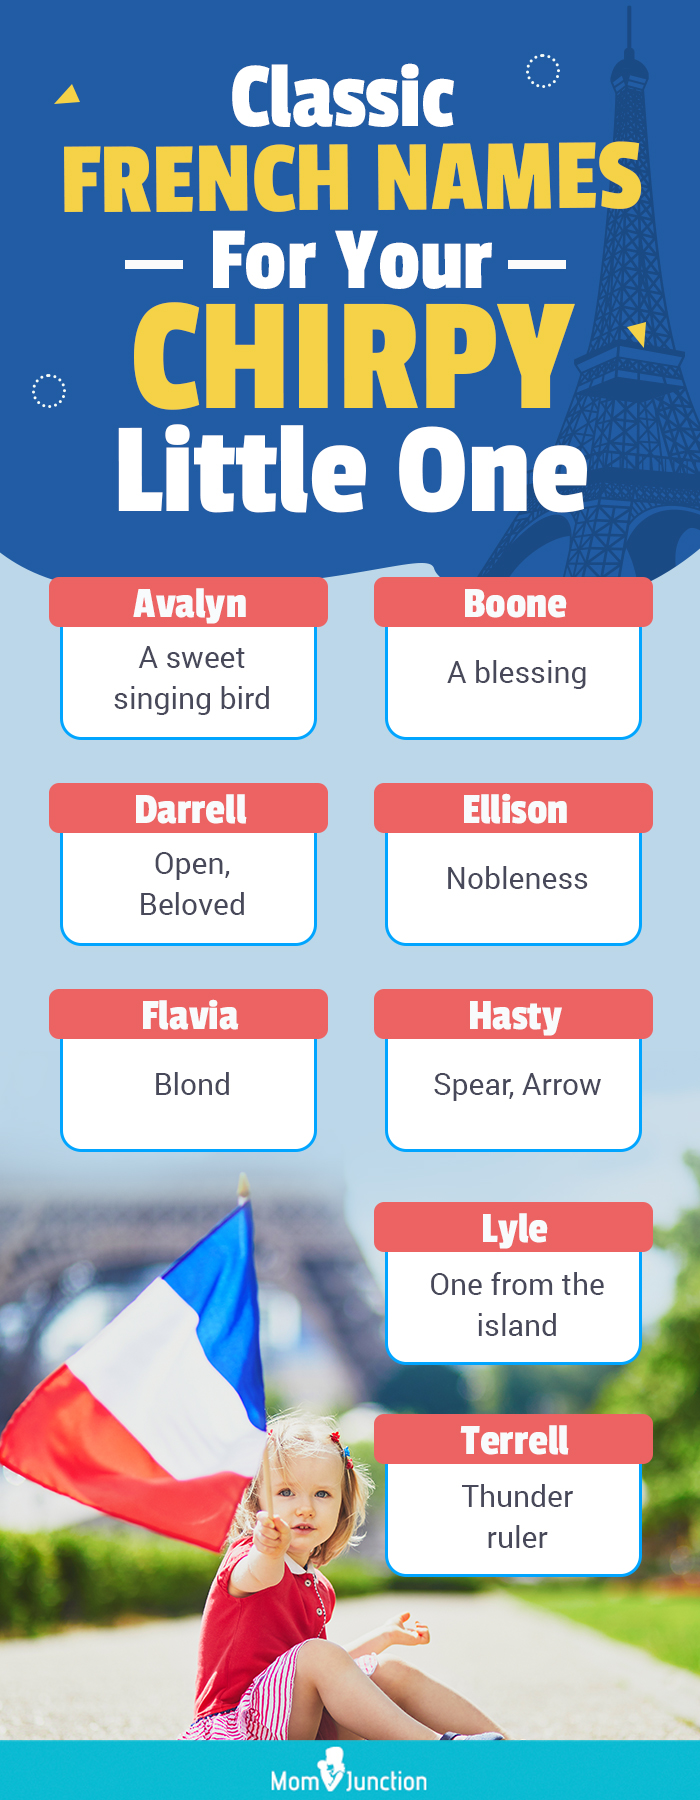 Classic French Names For Your Chirpy Little One (infographic)